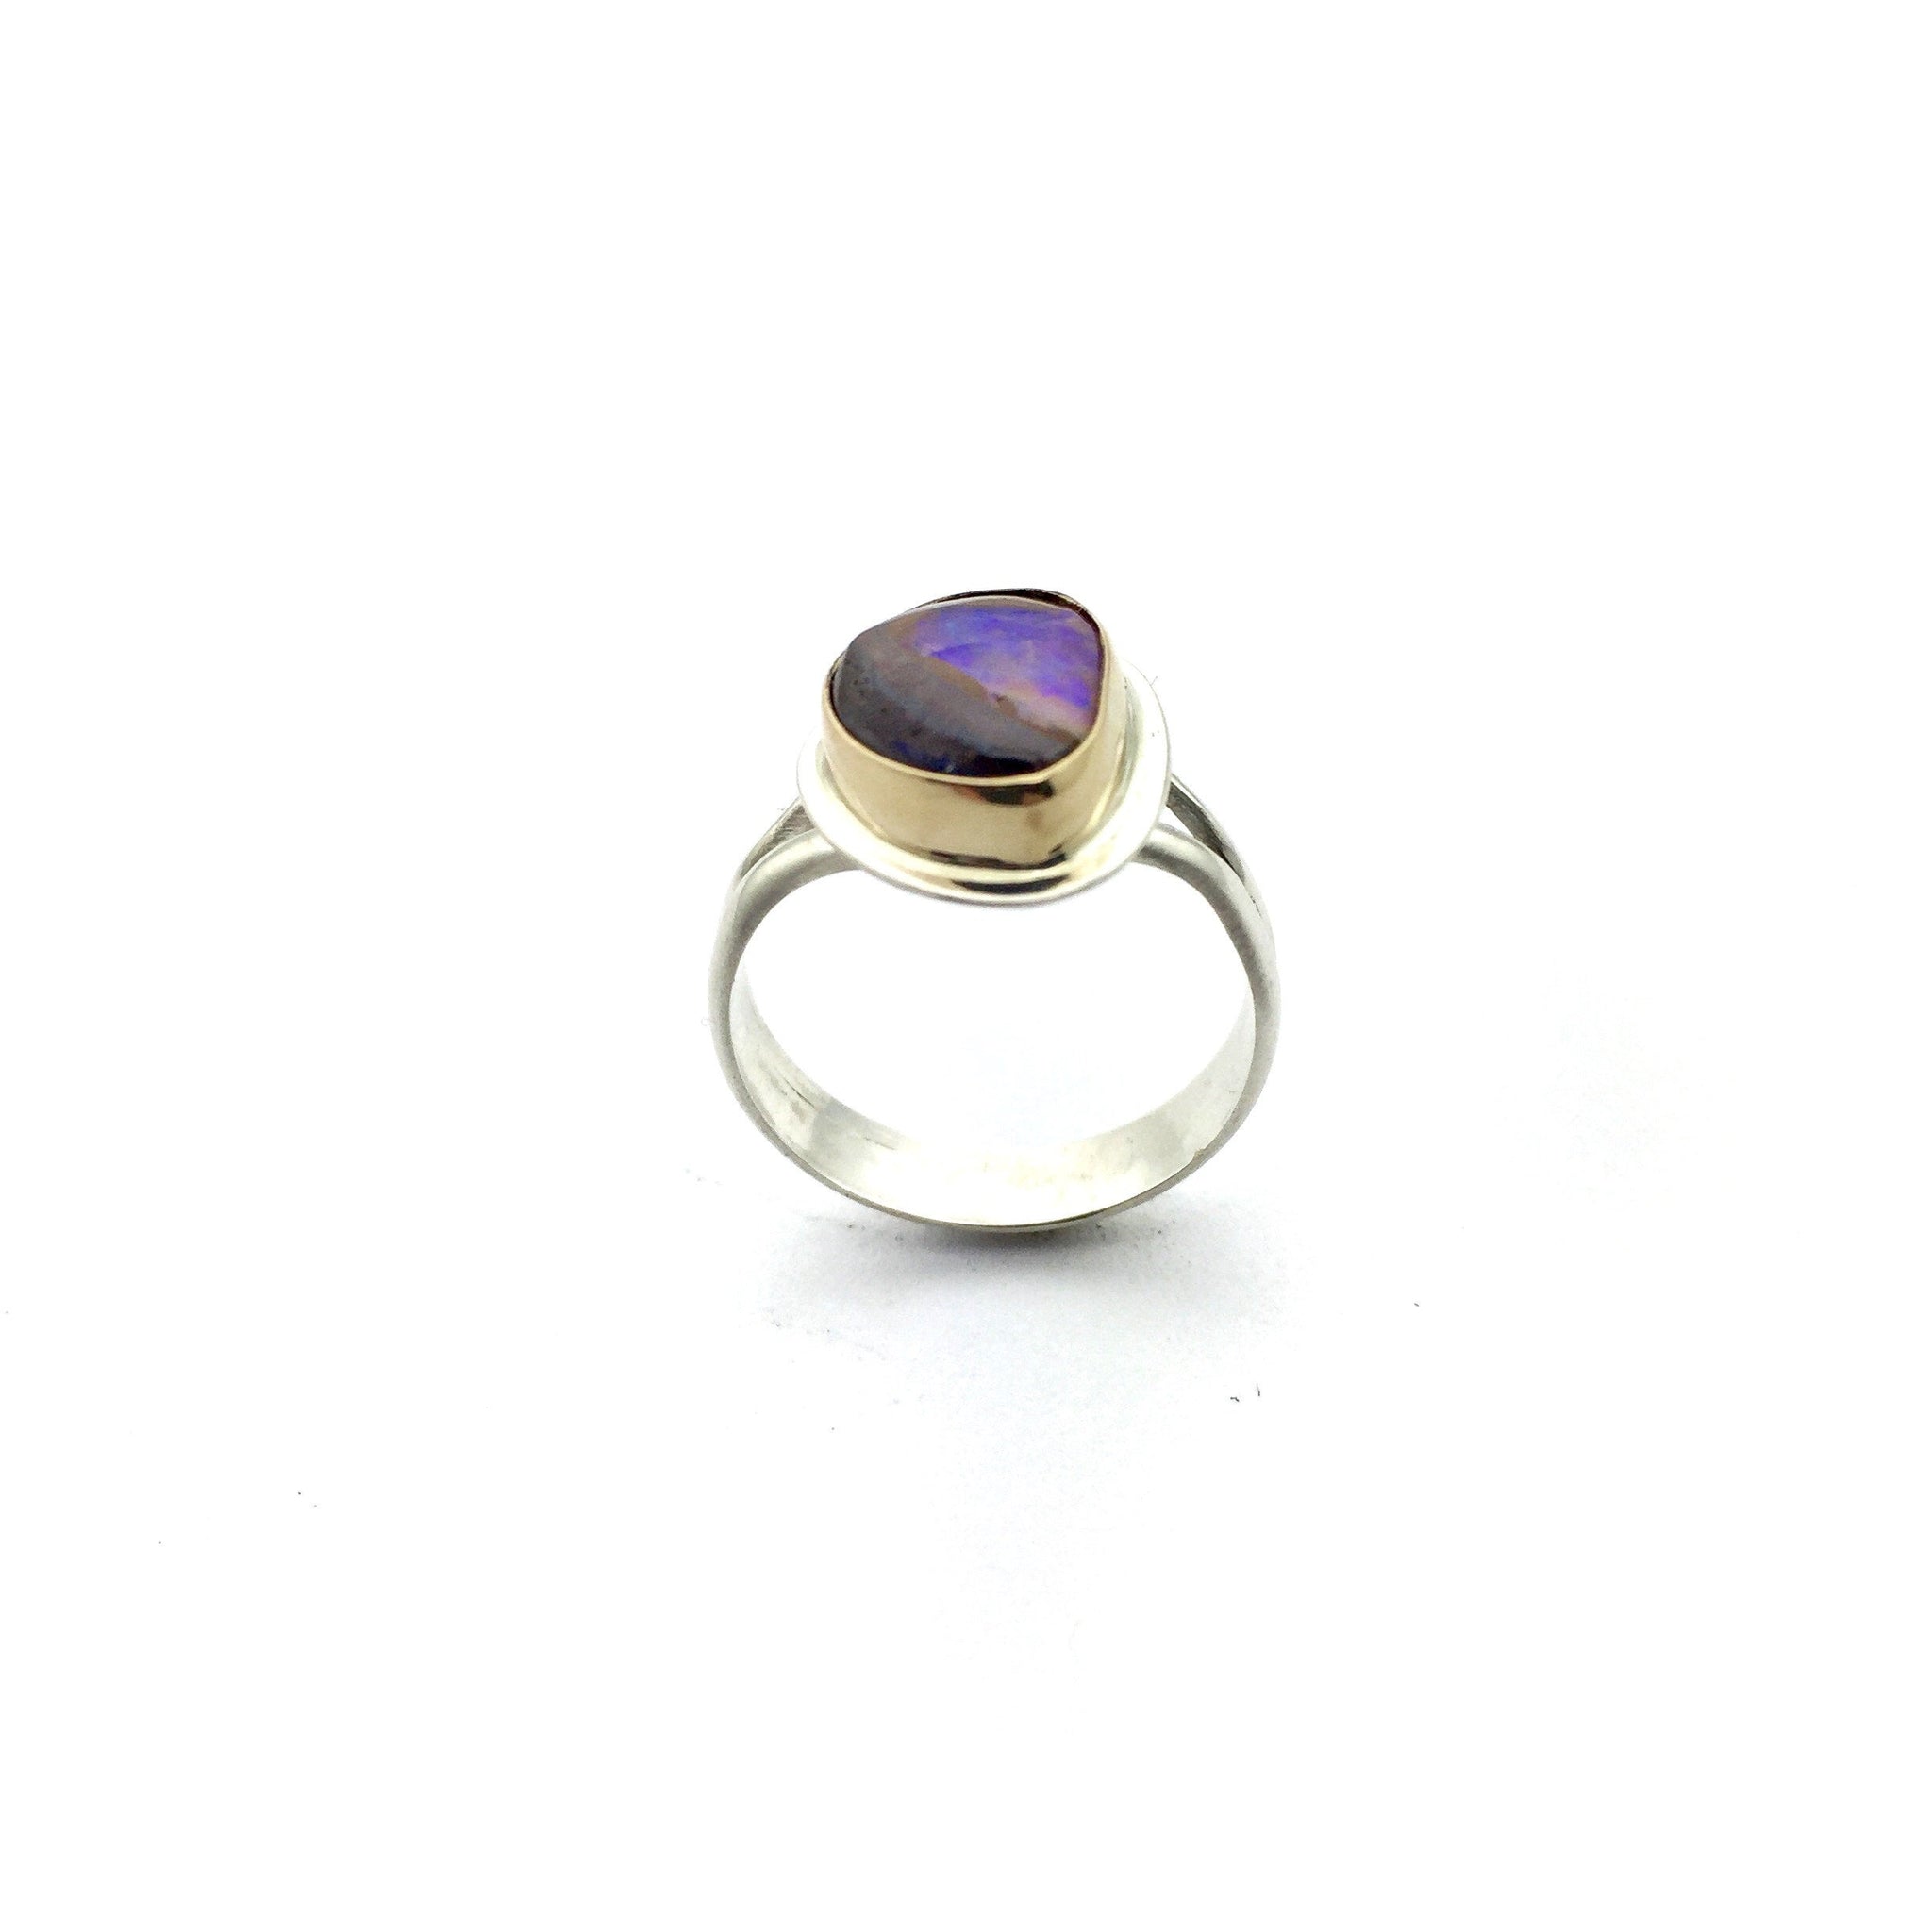 Koroit Opal Ring in 14k Gold and Sterling Silver